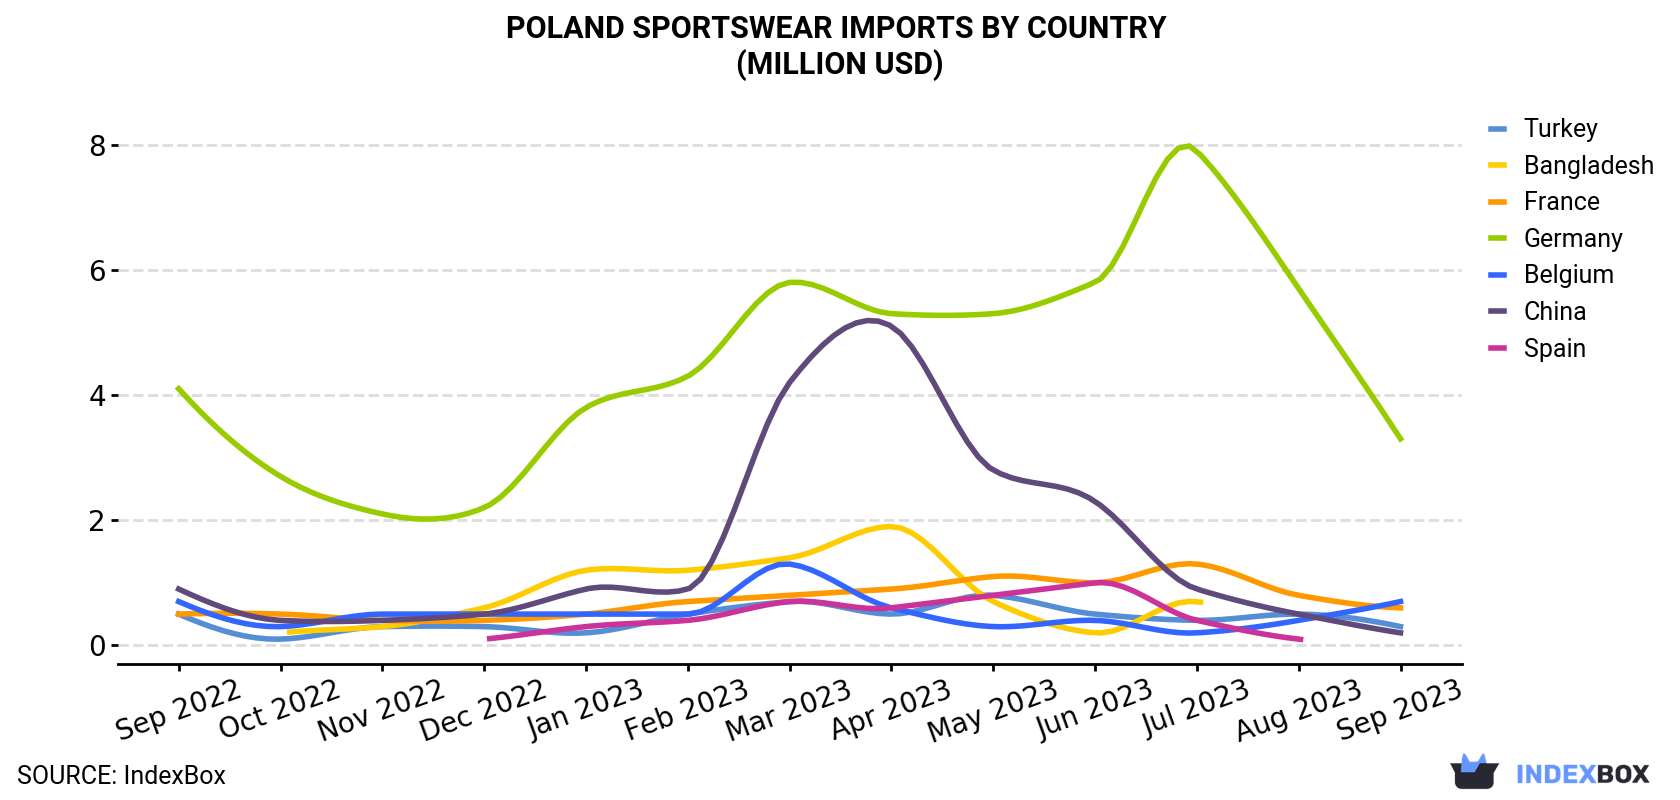 Poland Sportswear Imports By Country (Million USD)